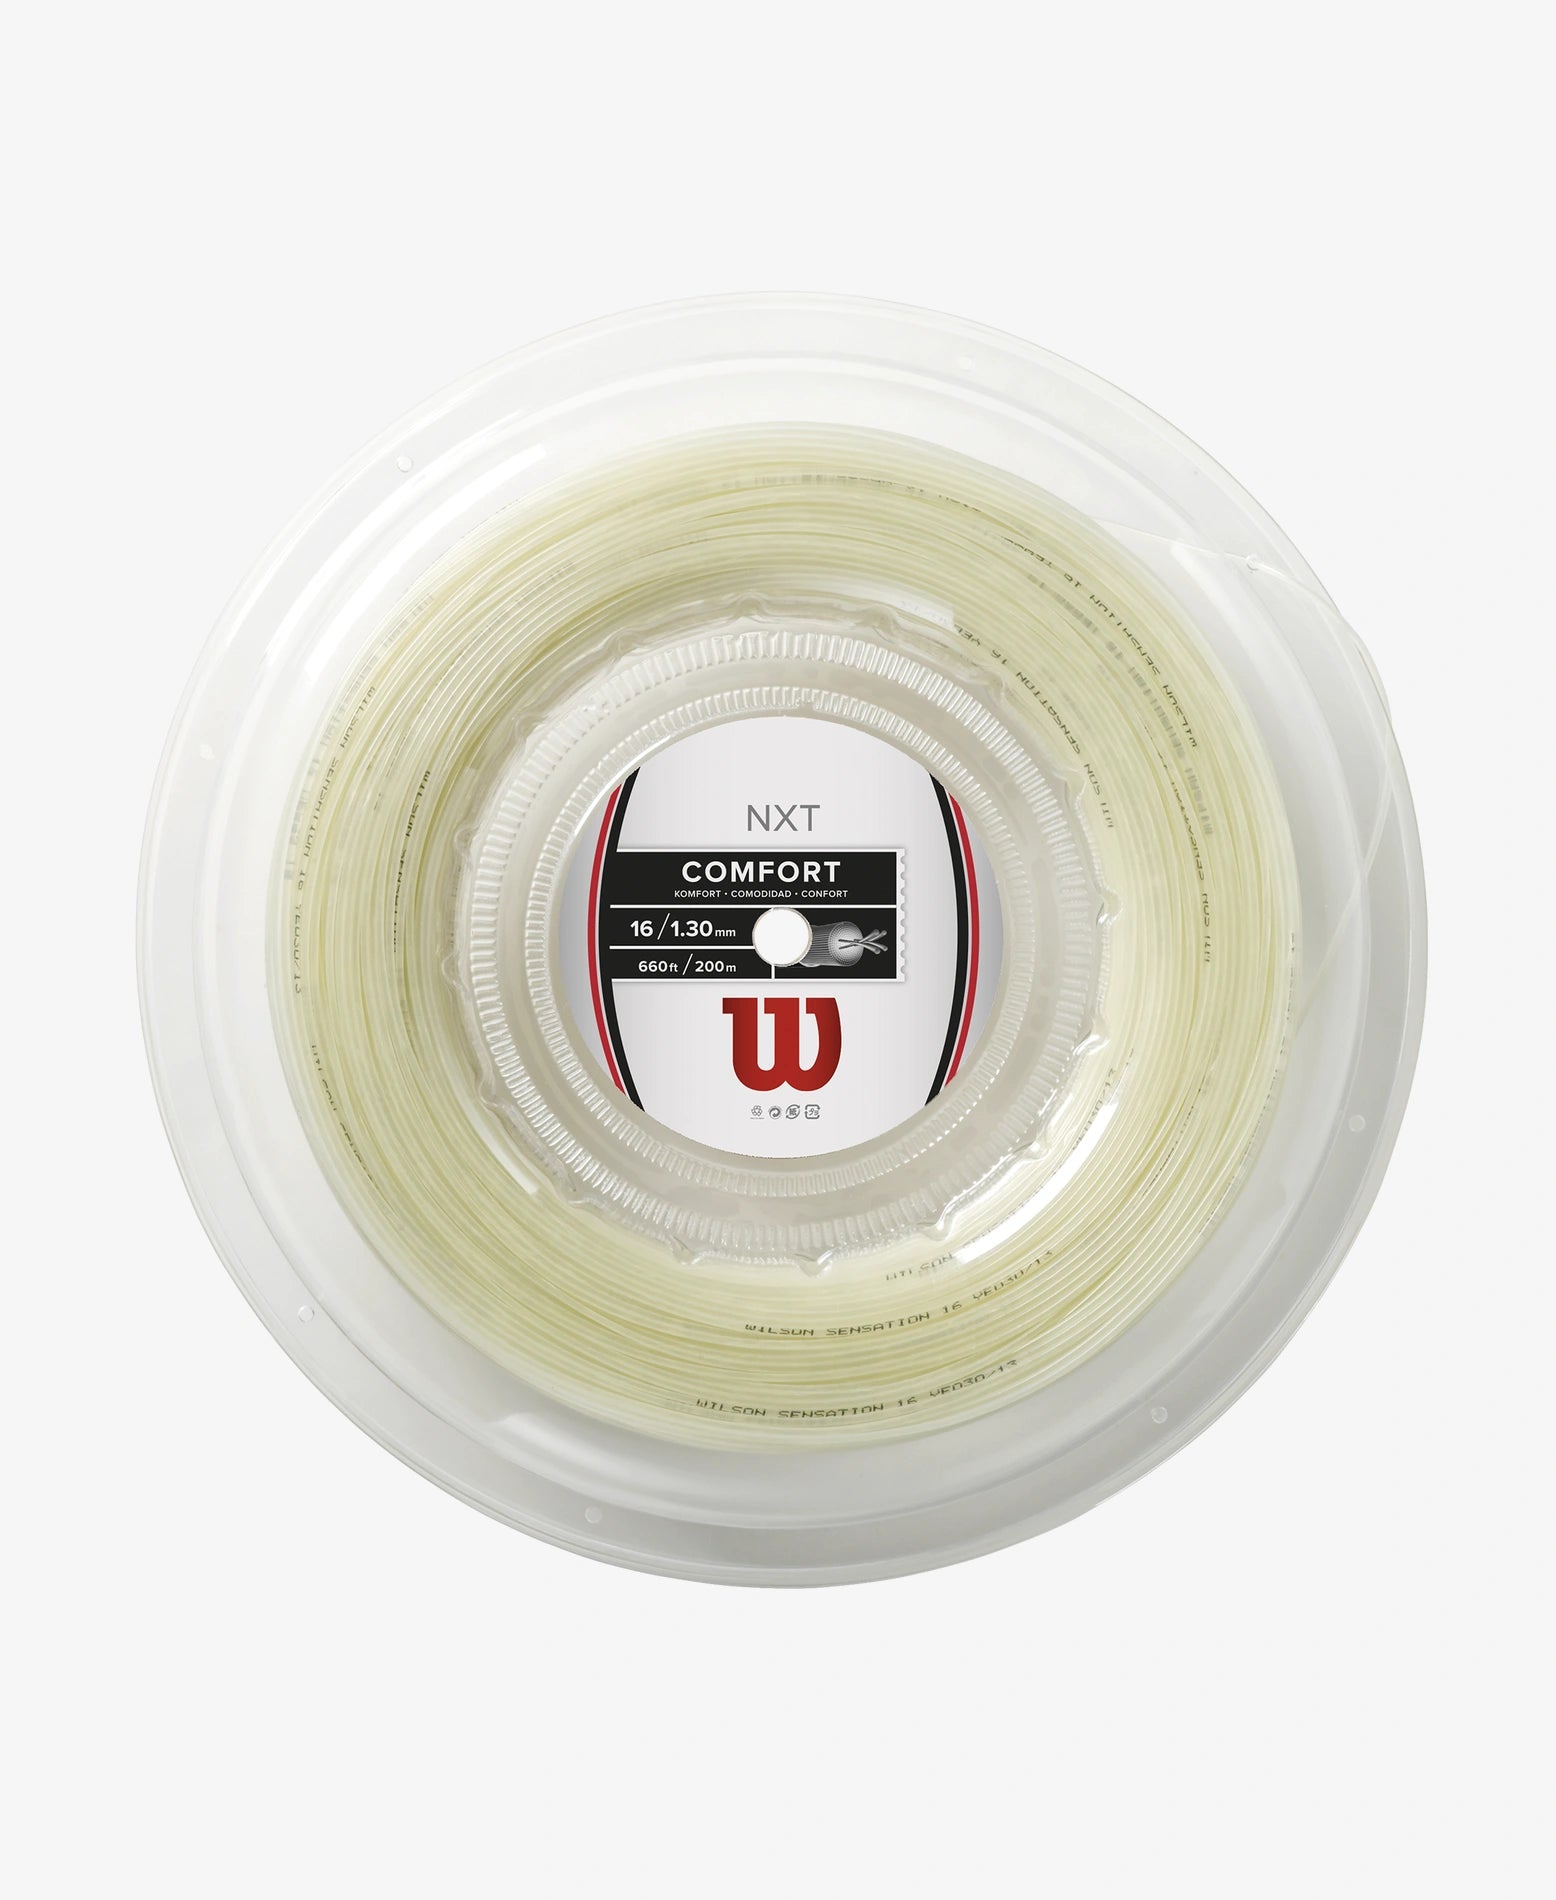 A 200m reel of Wilson NXT 16 Tennis String available for sale at GSM Sports.   